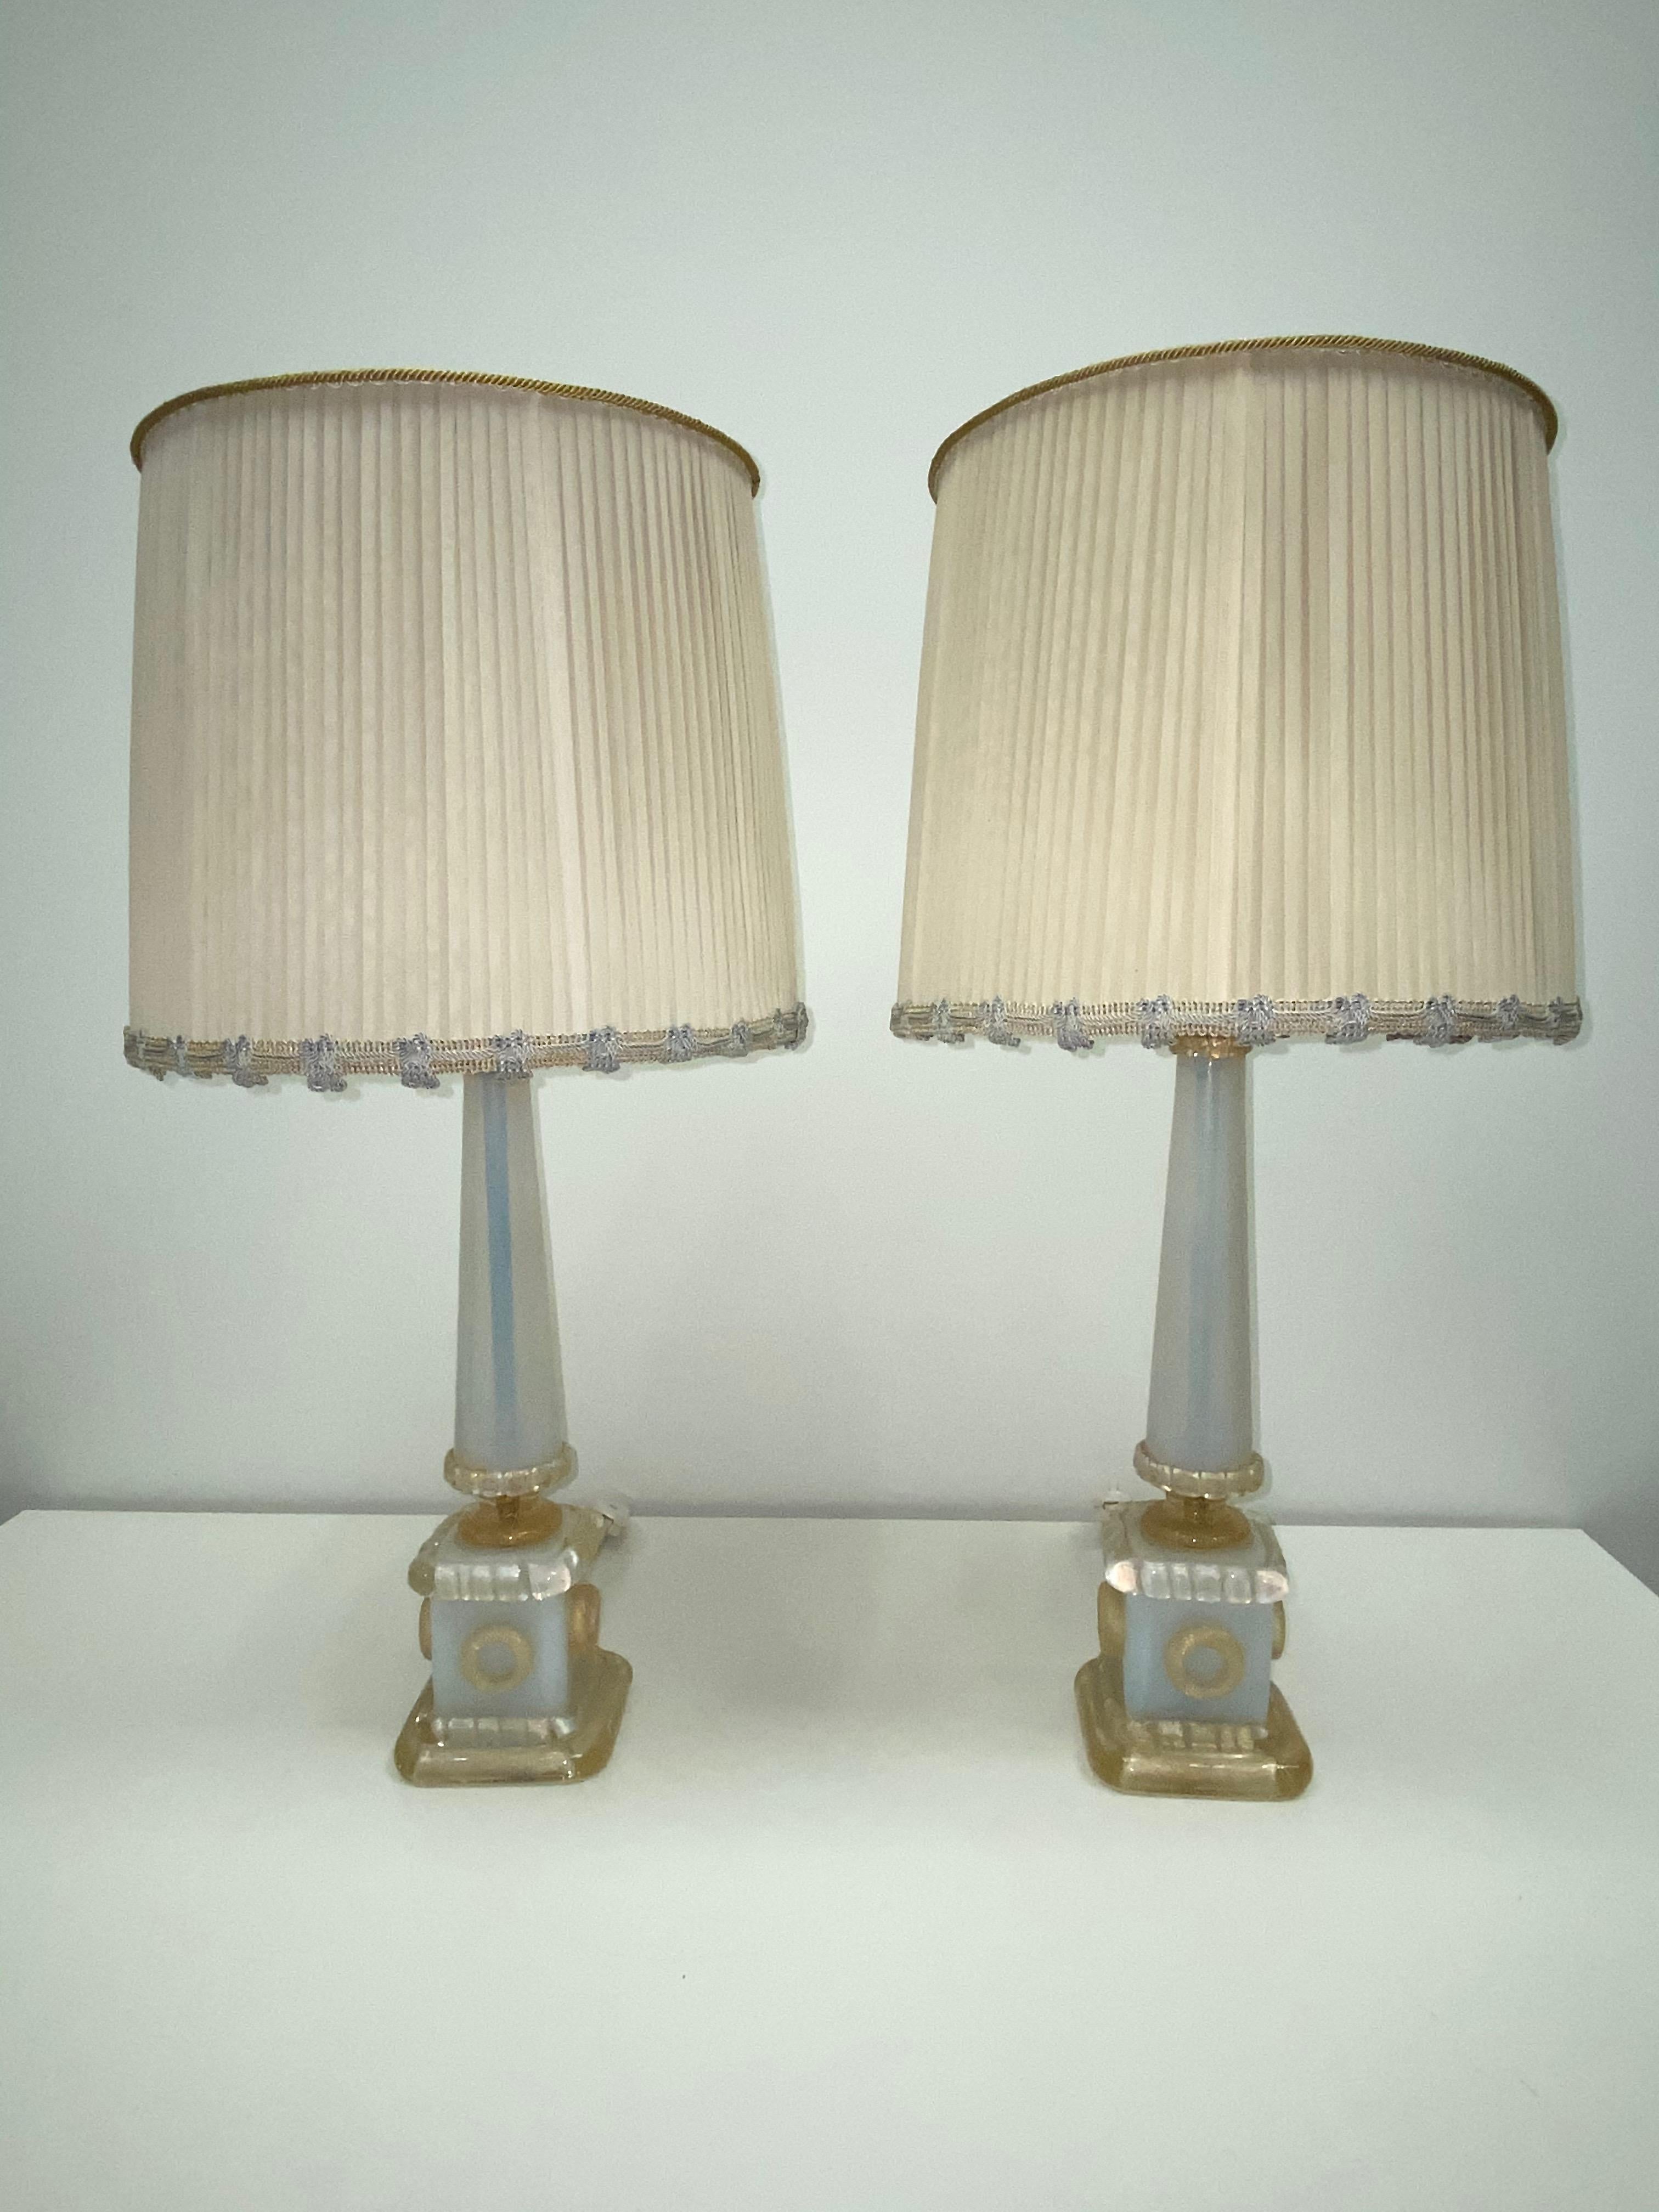 Italian Barovier Toso Neoclassic Obelisk Iridize & Gold Infused Murano Glass Table Lamps For Sale